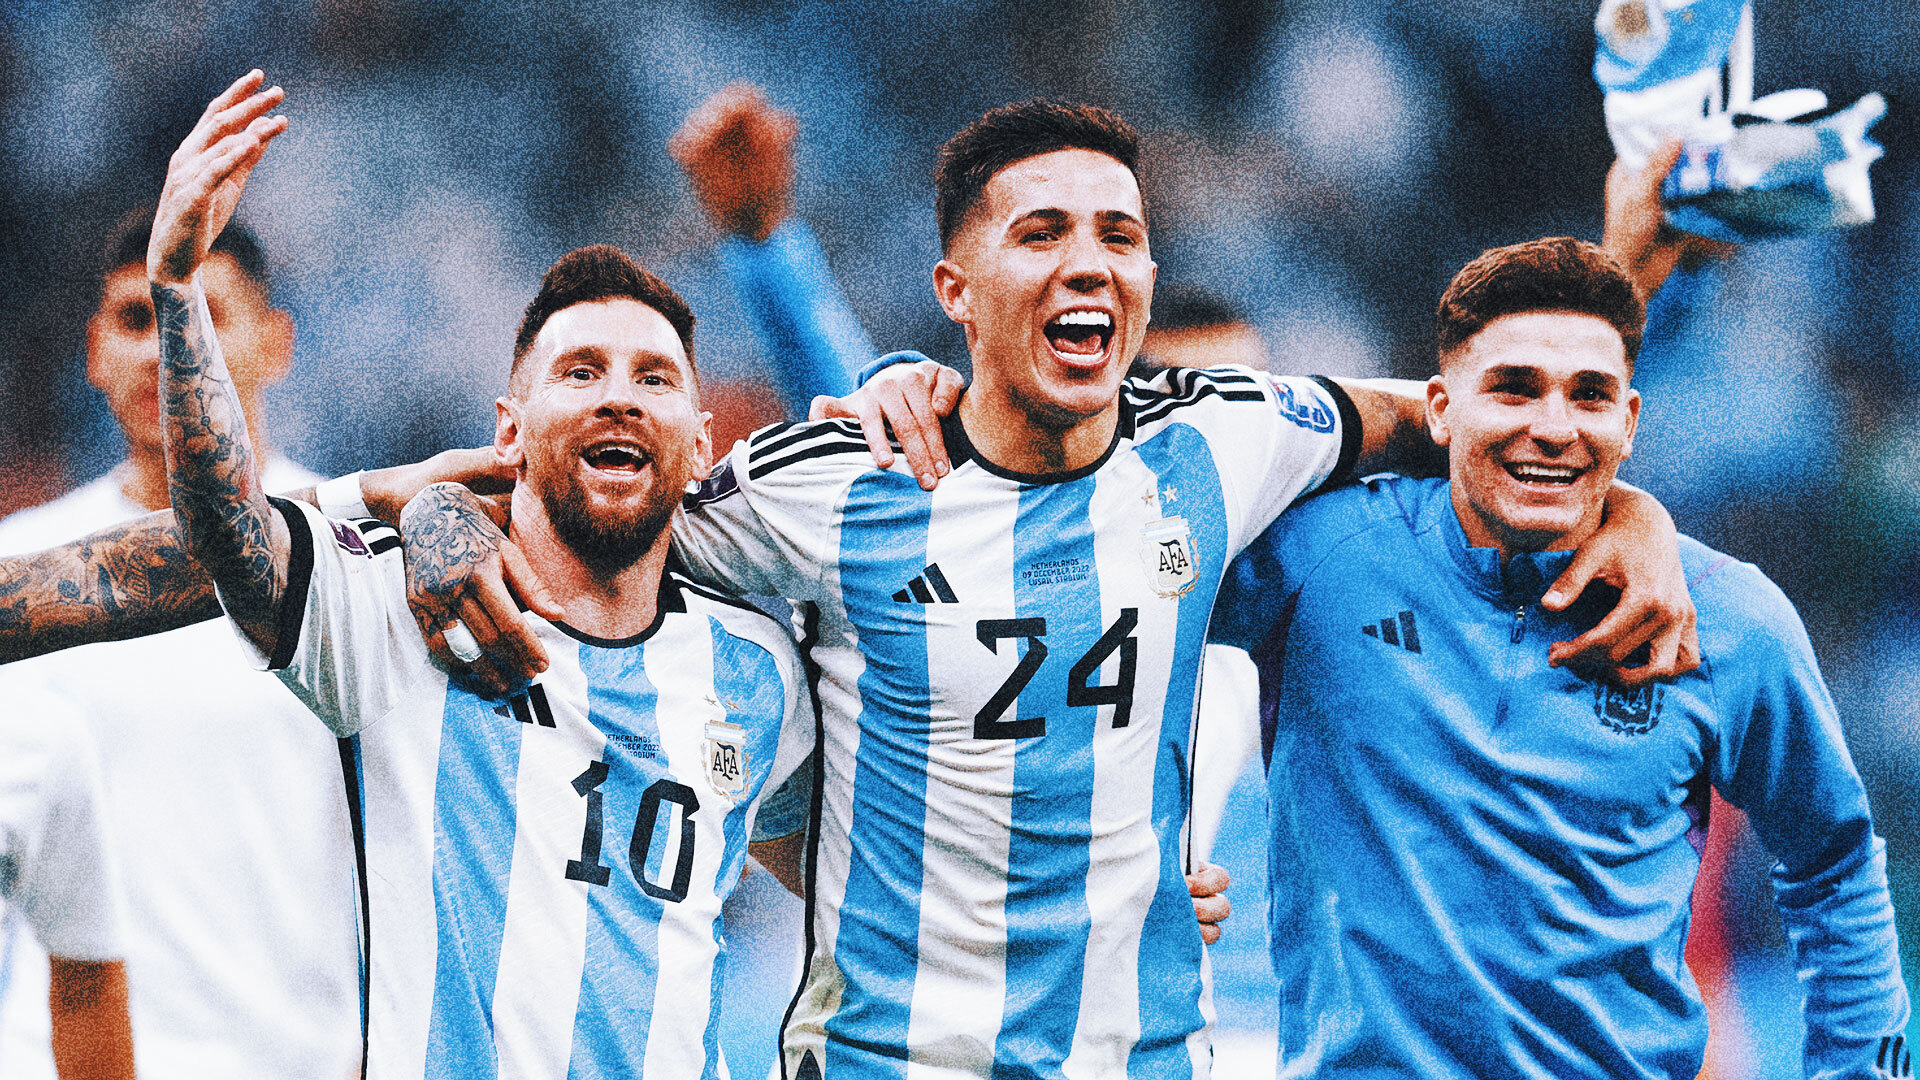 World Cup Now: Messi's brilliance, Argentina defense key in victory